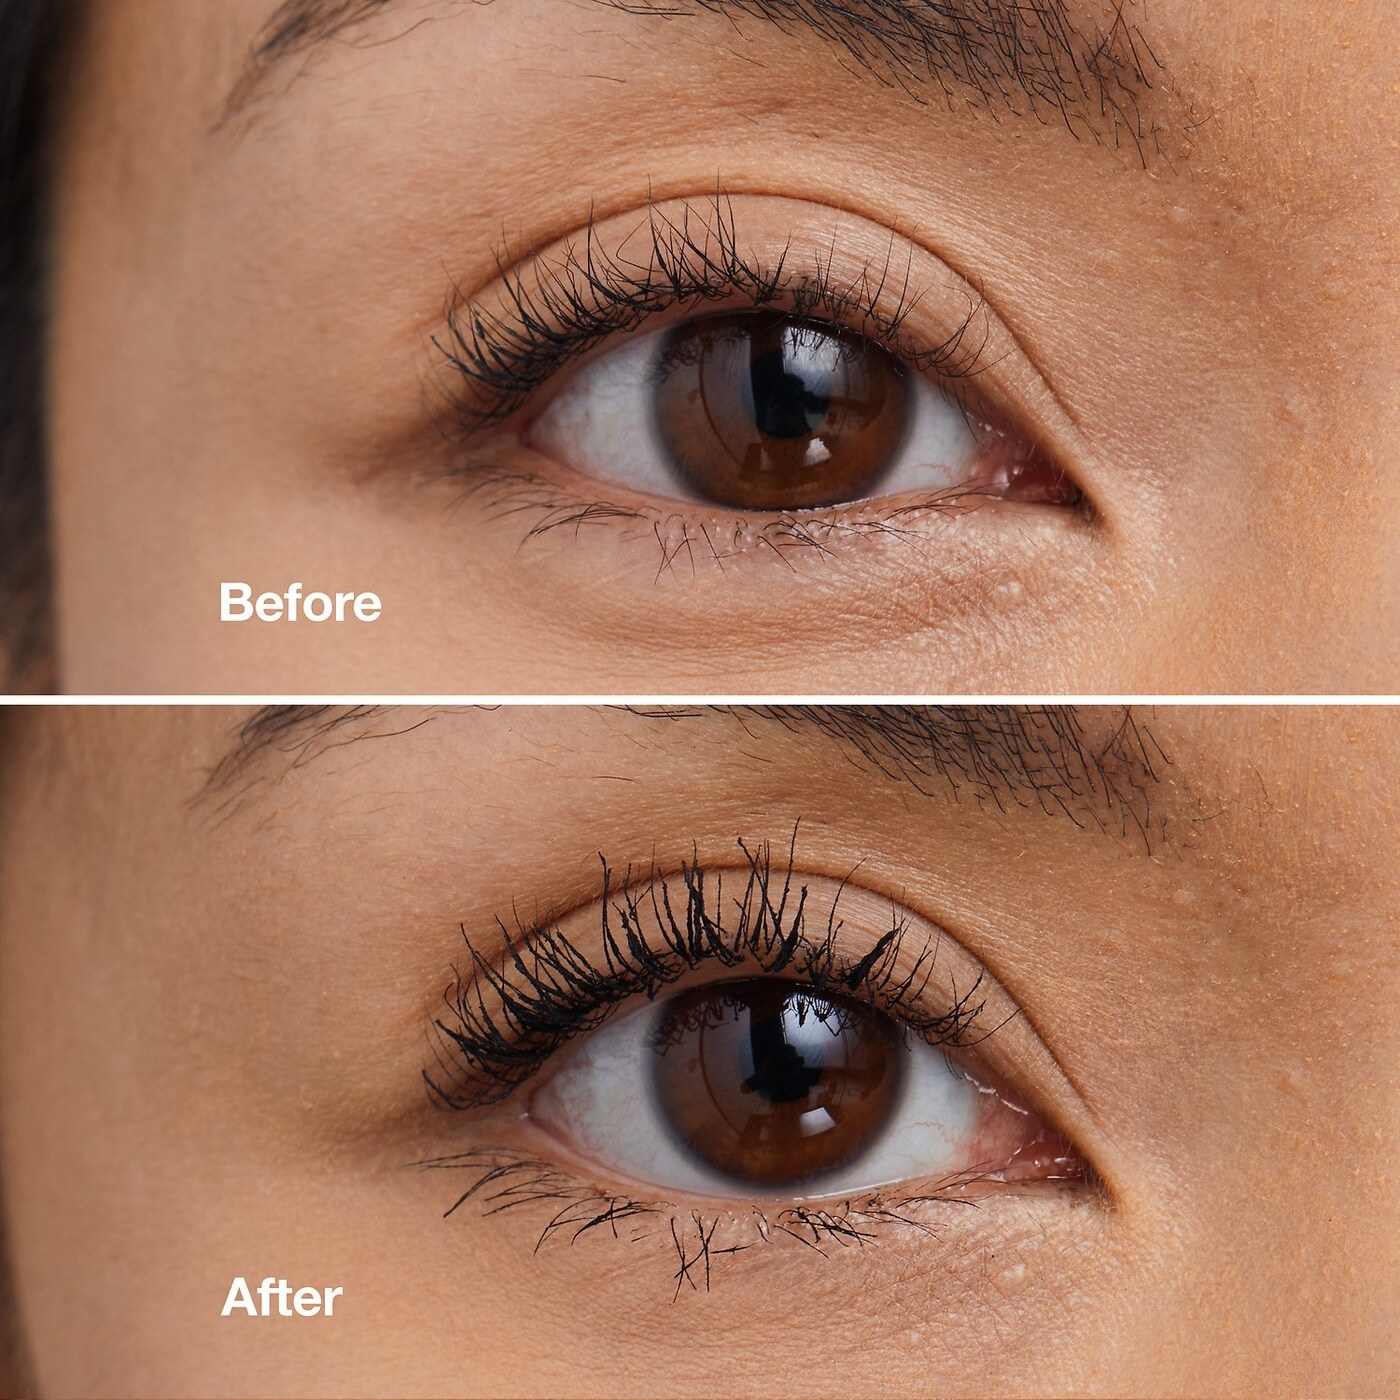 a before and after where the after shows bottom lashes that are noticeably darker